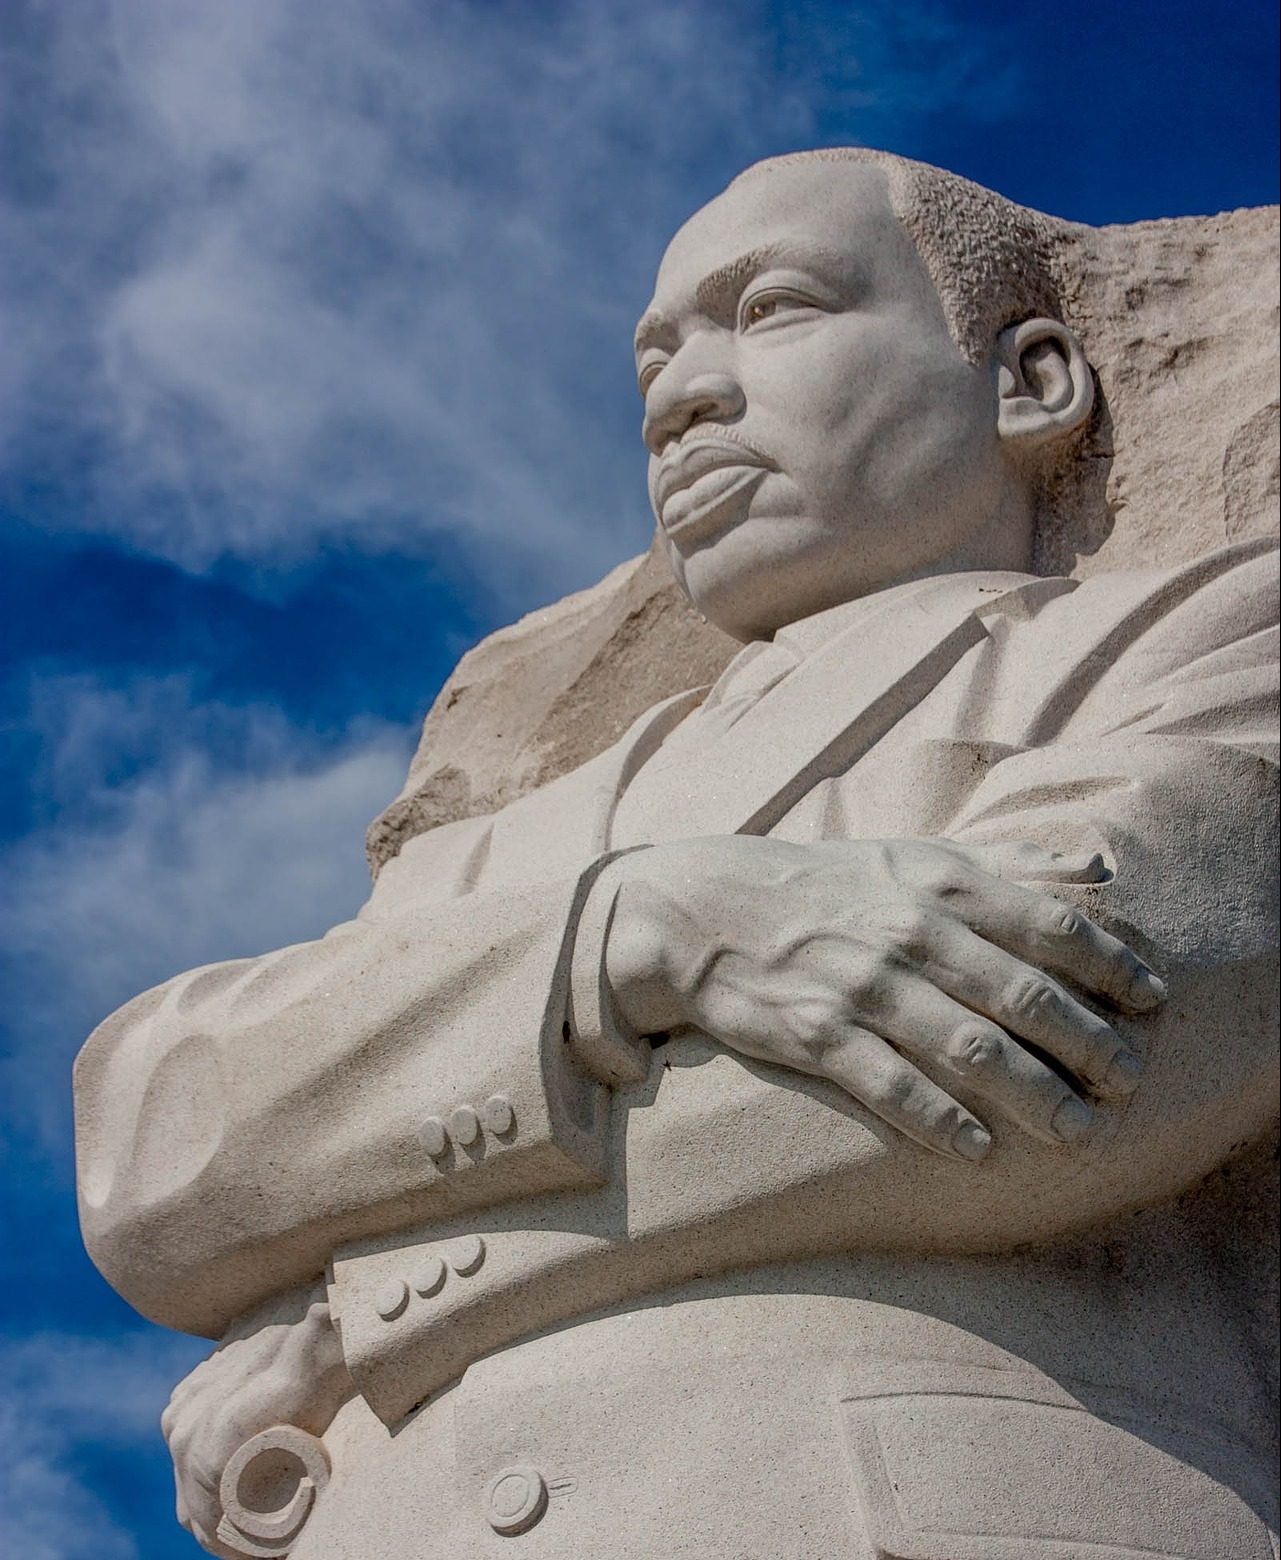 MLK memorial white granite statue in Washington DC- MLK waist up with arms crossed and blue sky in the background